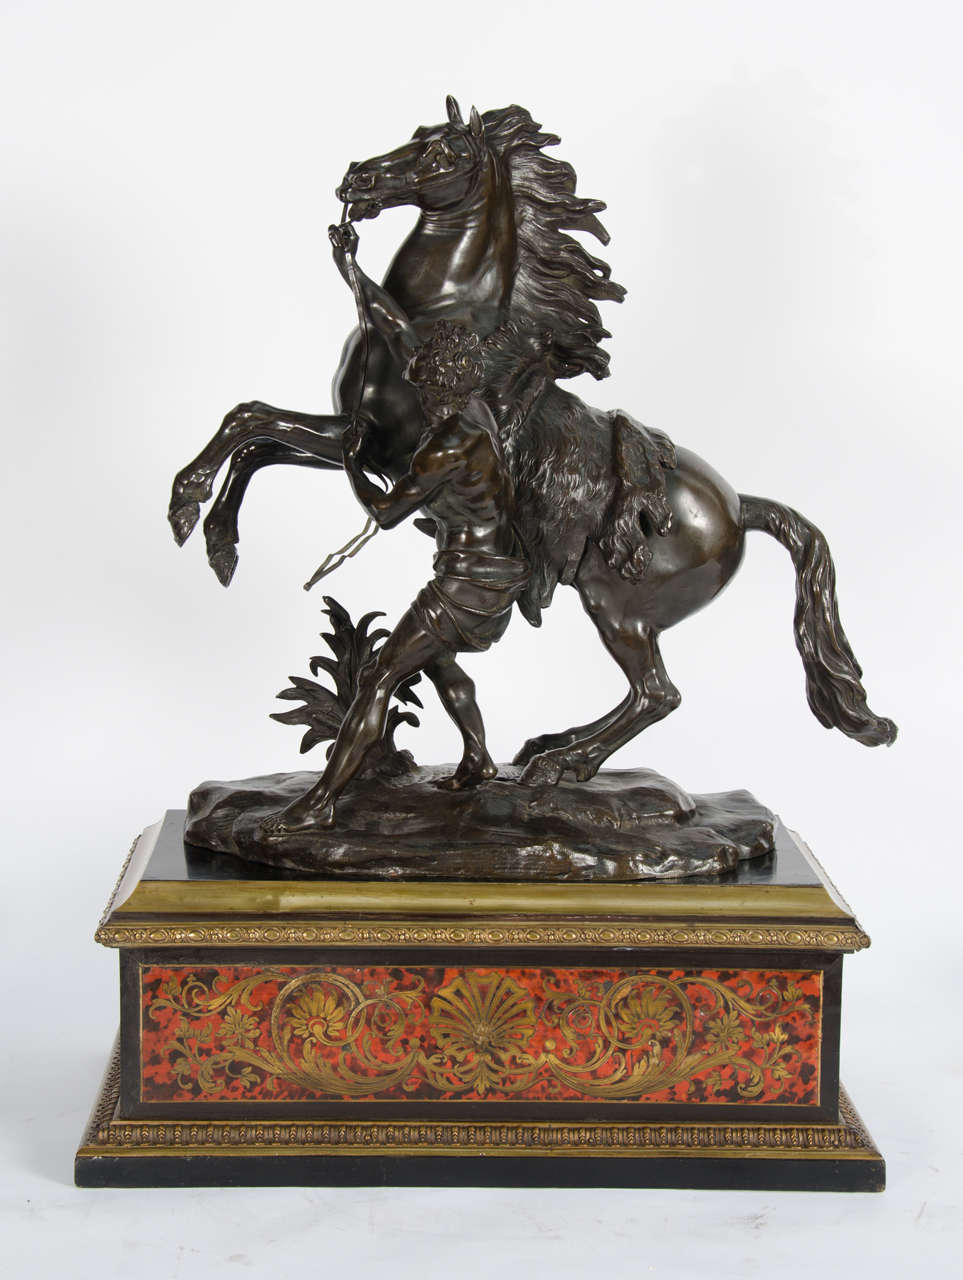 A very impressive striking pair of French bronze Marly horses after Guillaume Coustou the elder 1677-1746. Mounted on ebonized, boulle inlaid pedestals.

